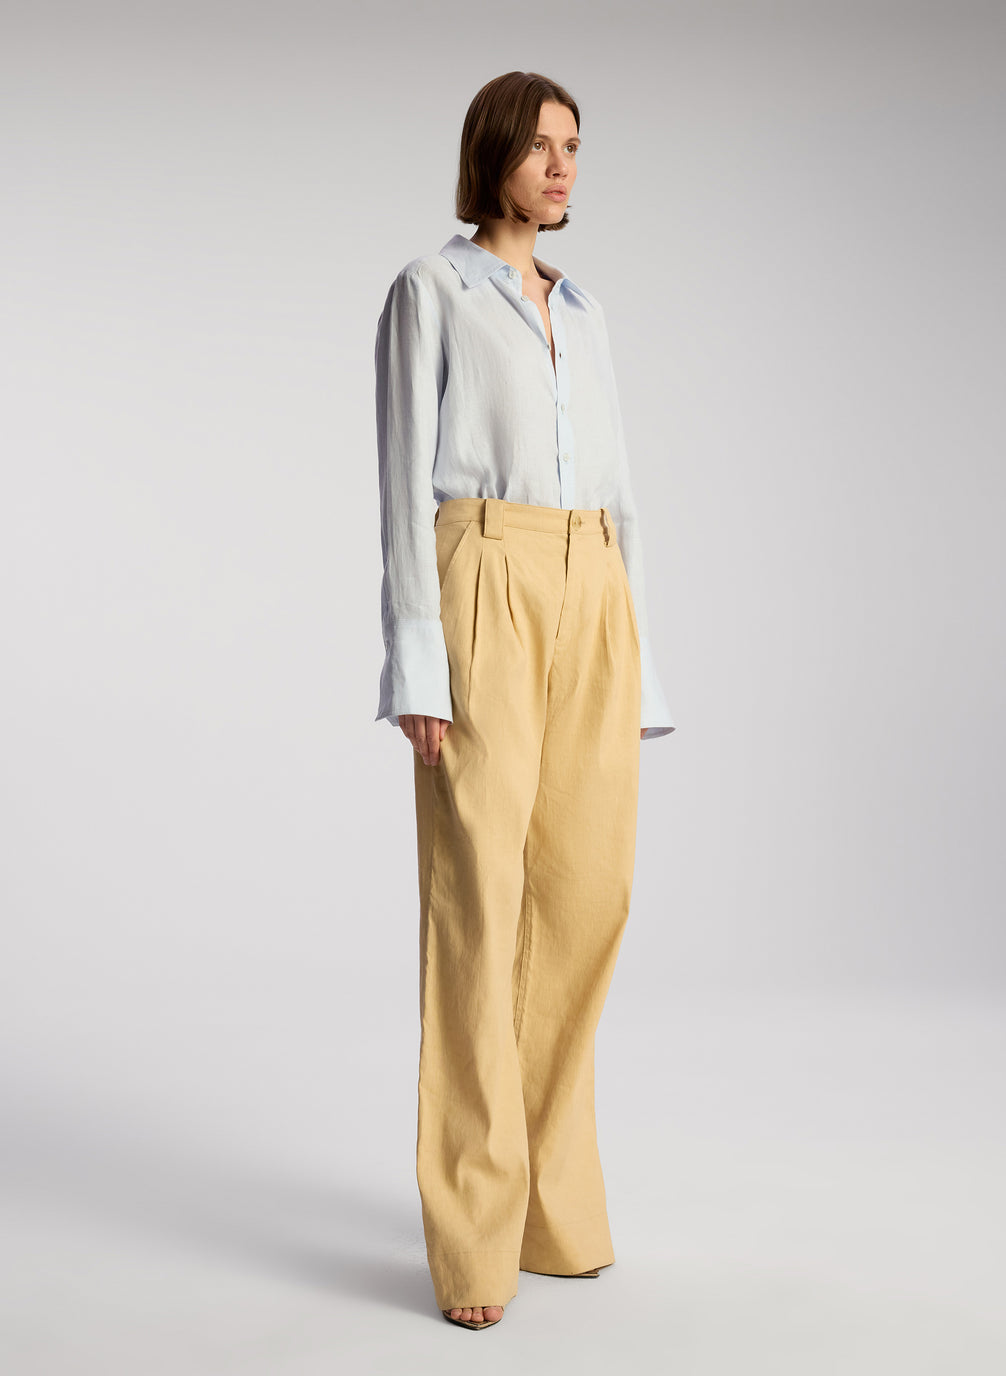 side view of woman wearing light blue linen button down shirt and tan pants